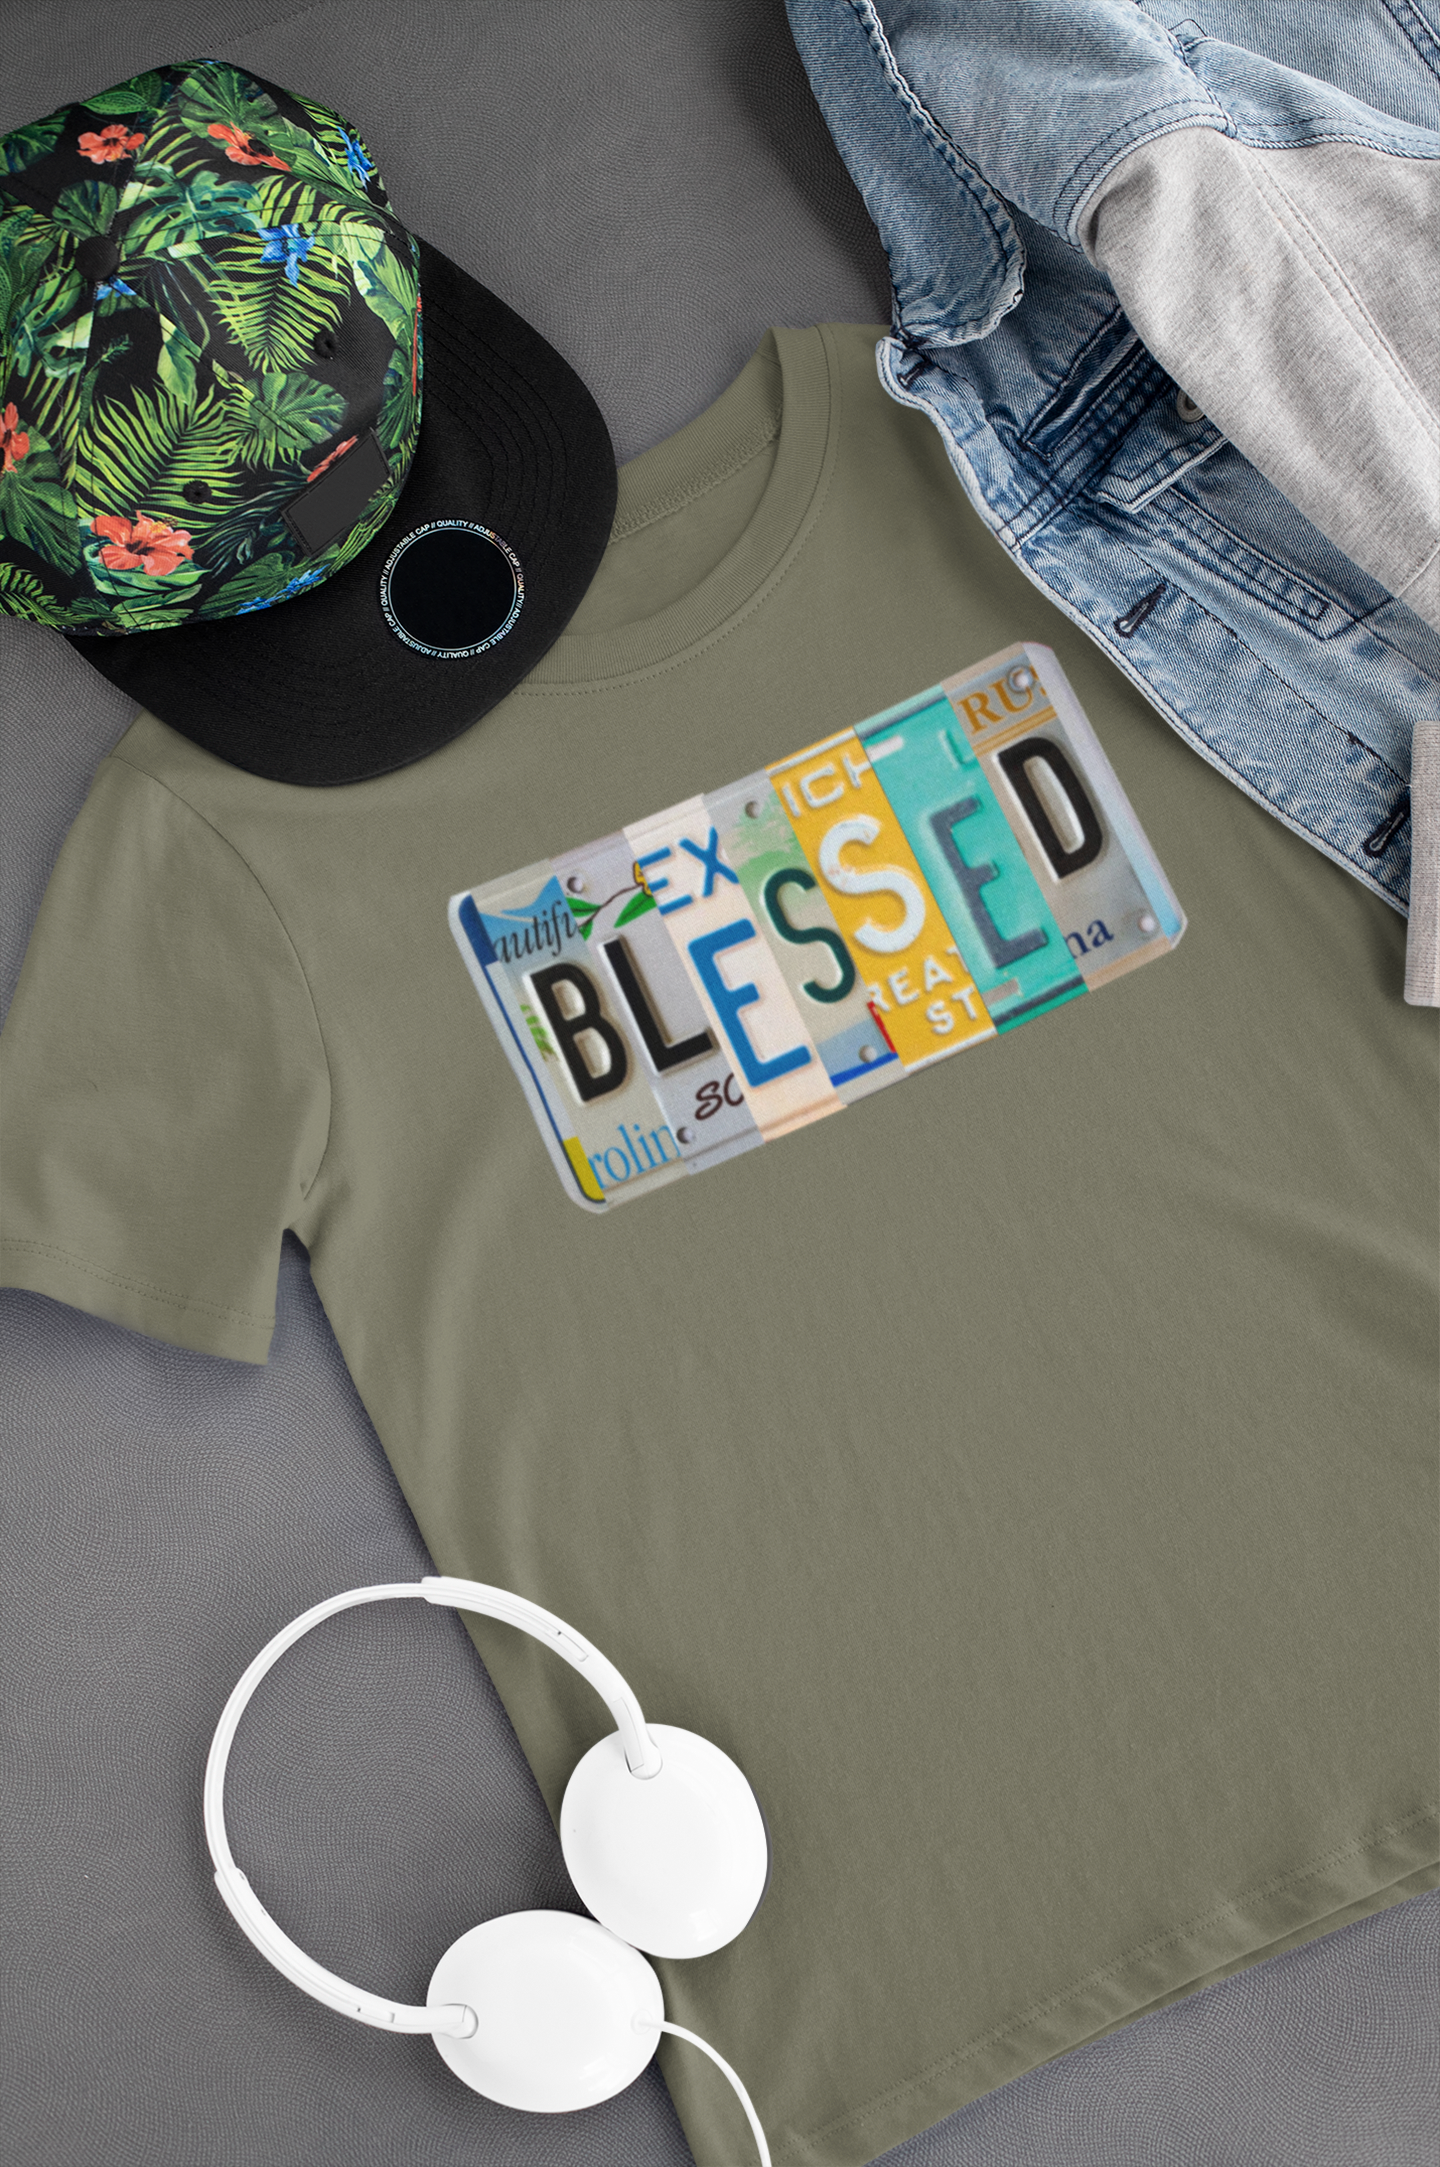 Inspirational 'BLESSED' Unisex Cotton Crew Tee - Comfortable and Stylish Shirt